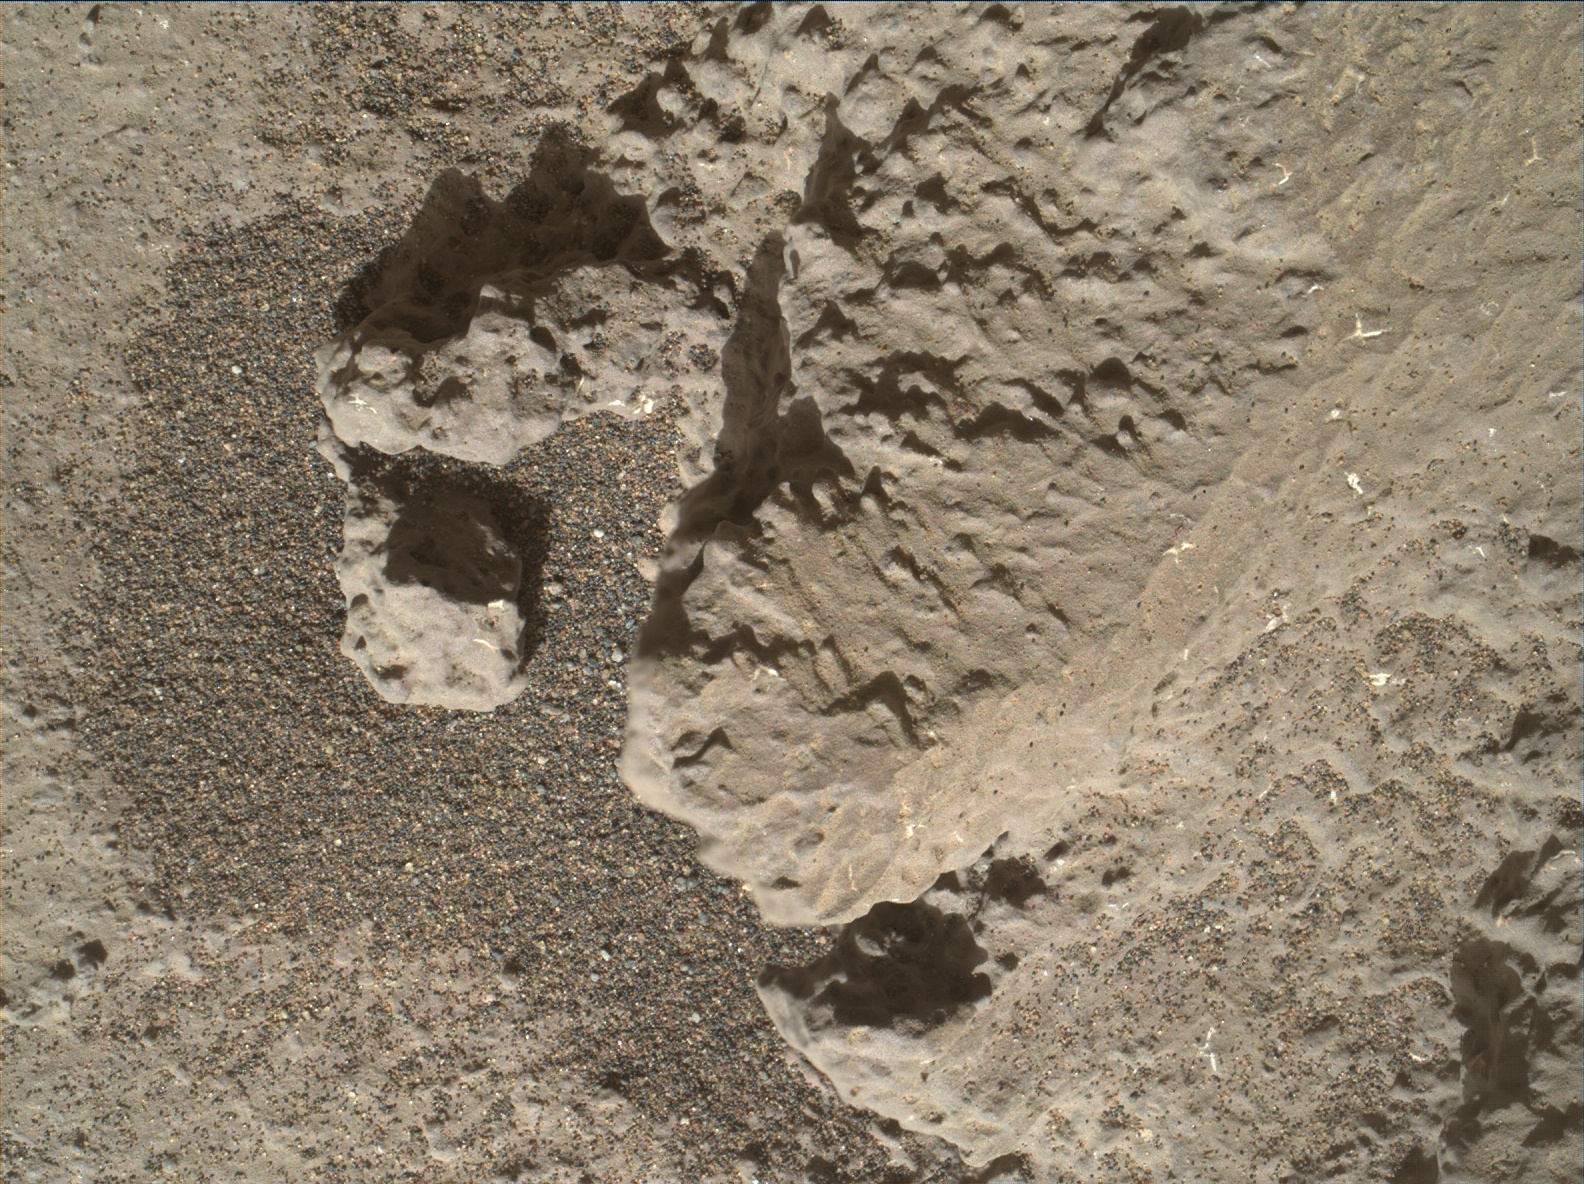 Nasa's Mars rover Curiosity acquired this image using its Mars Hand Lens Imager (MAHLI) on Sol 1246